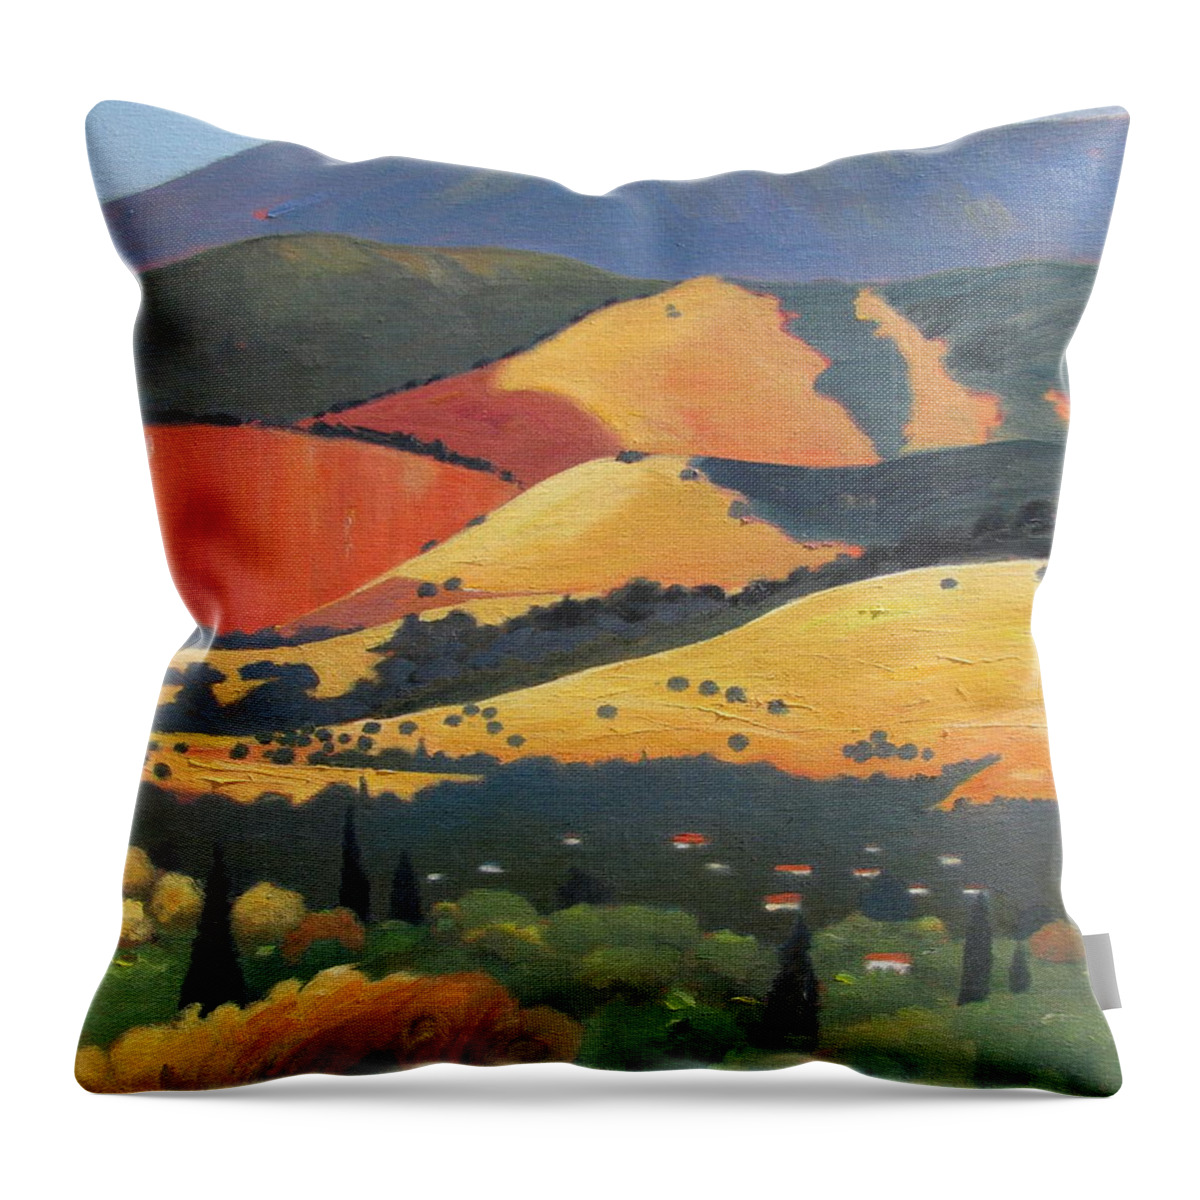 Mountain Throw Pillow featuring the painting Mt. Diablo 1 by Gary Coleman